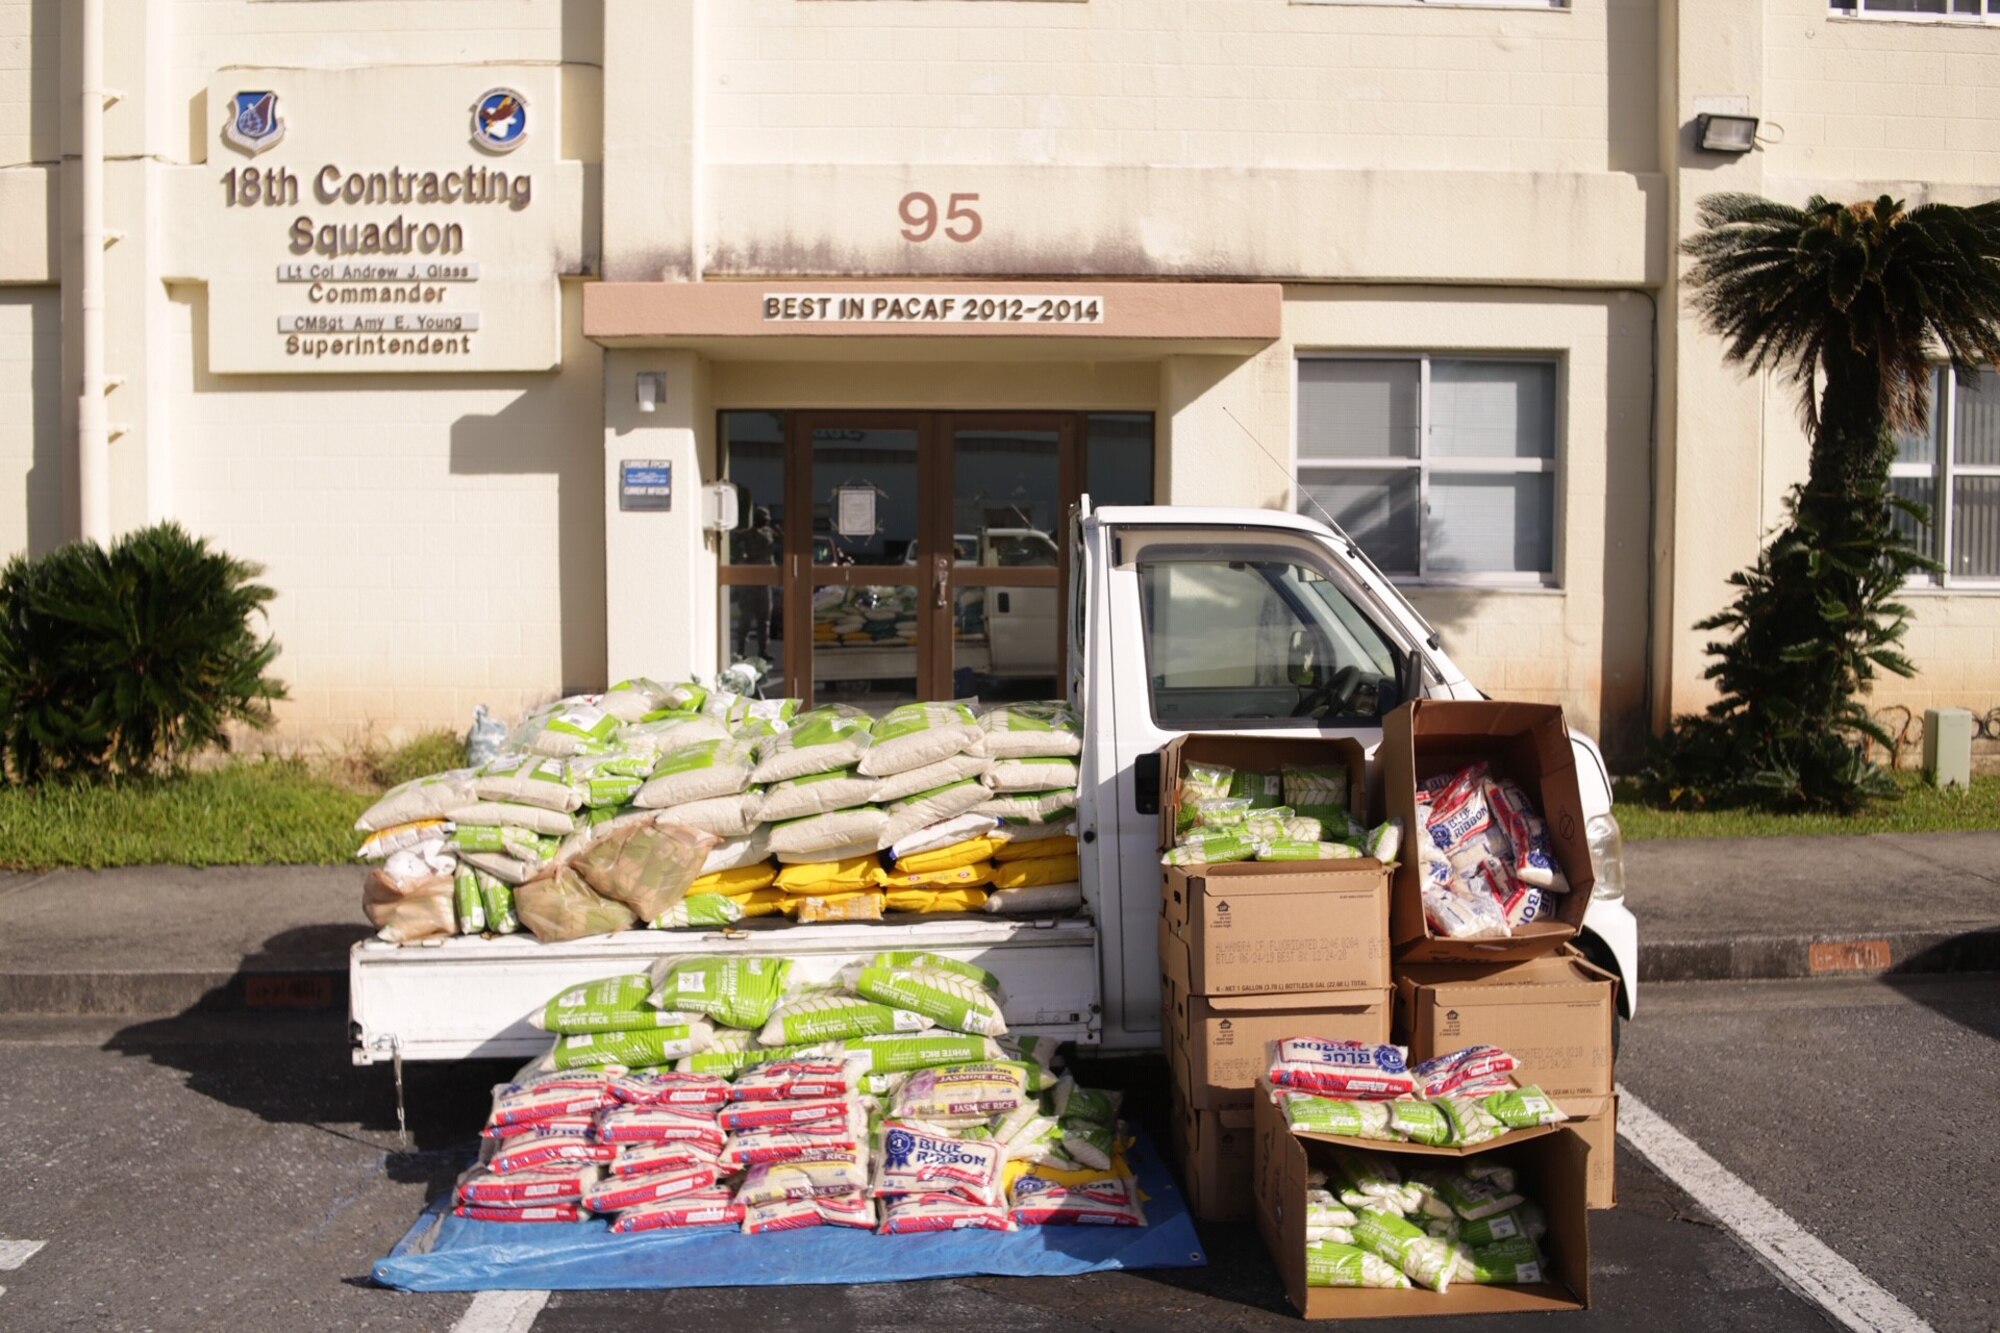 18th CONS donates 3,010 lbs of rice to local shelters